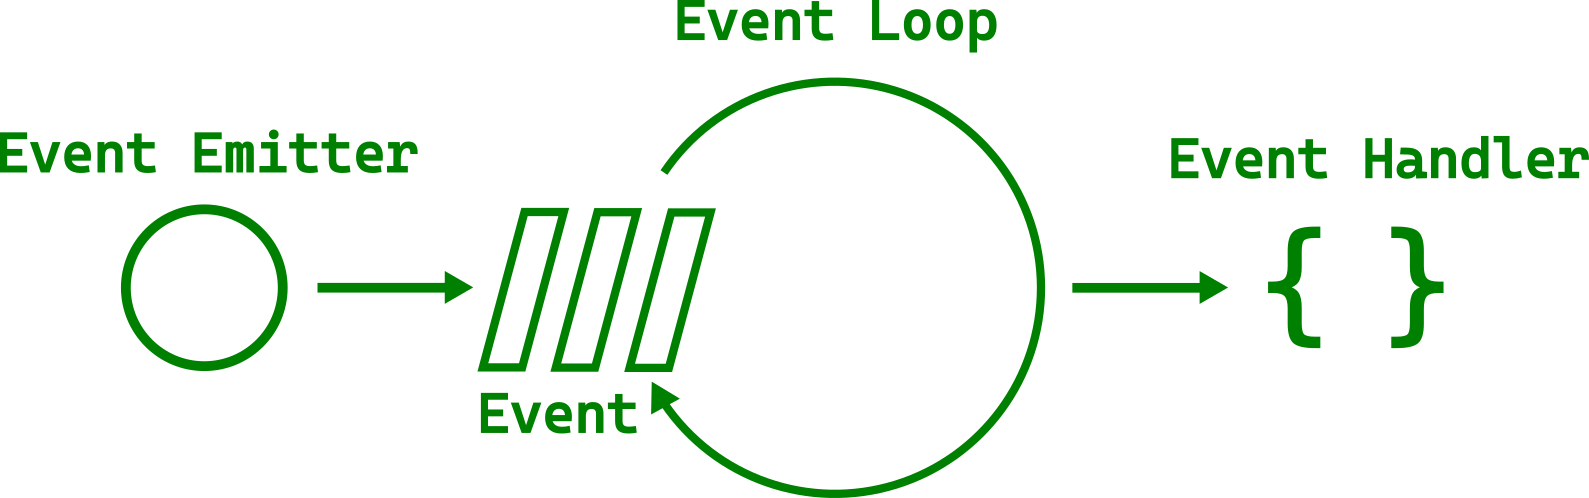 Diagram showing the main event loop